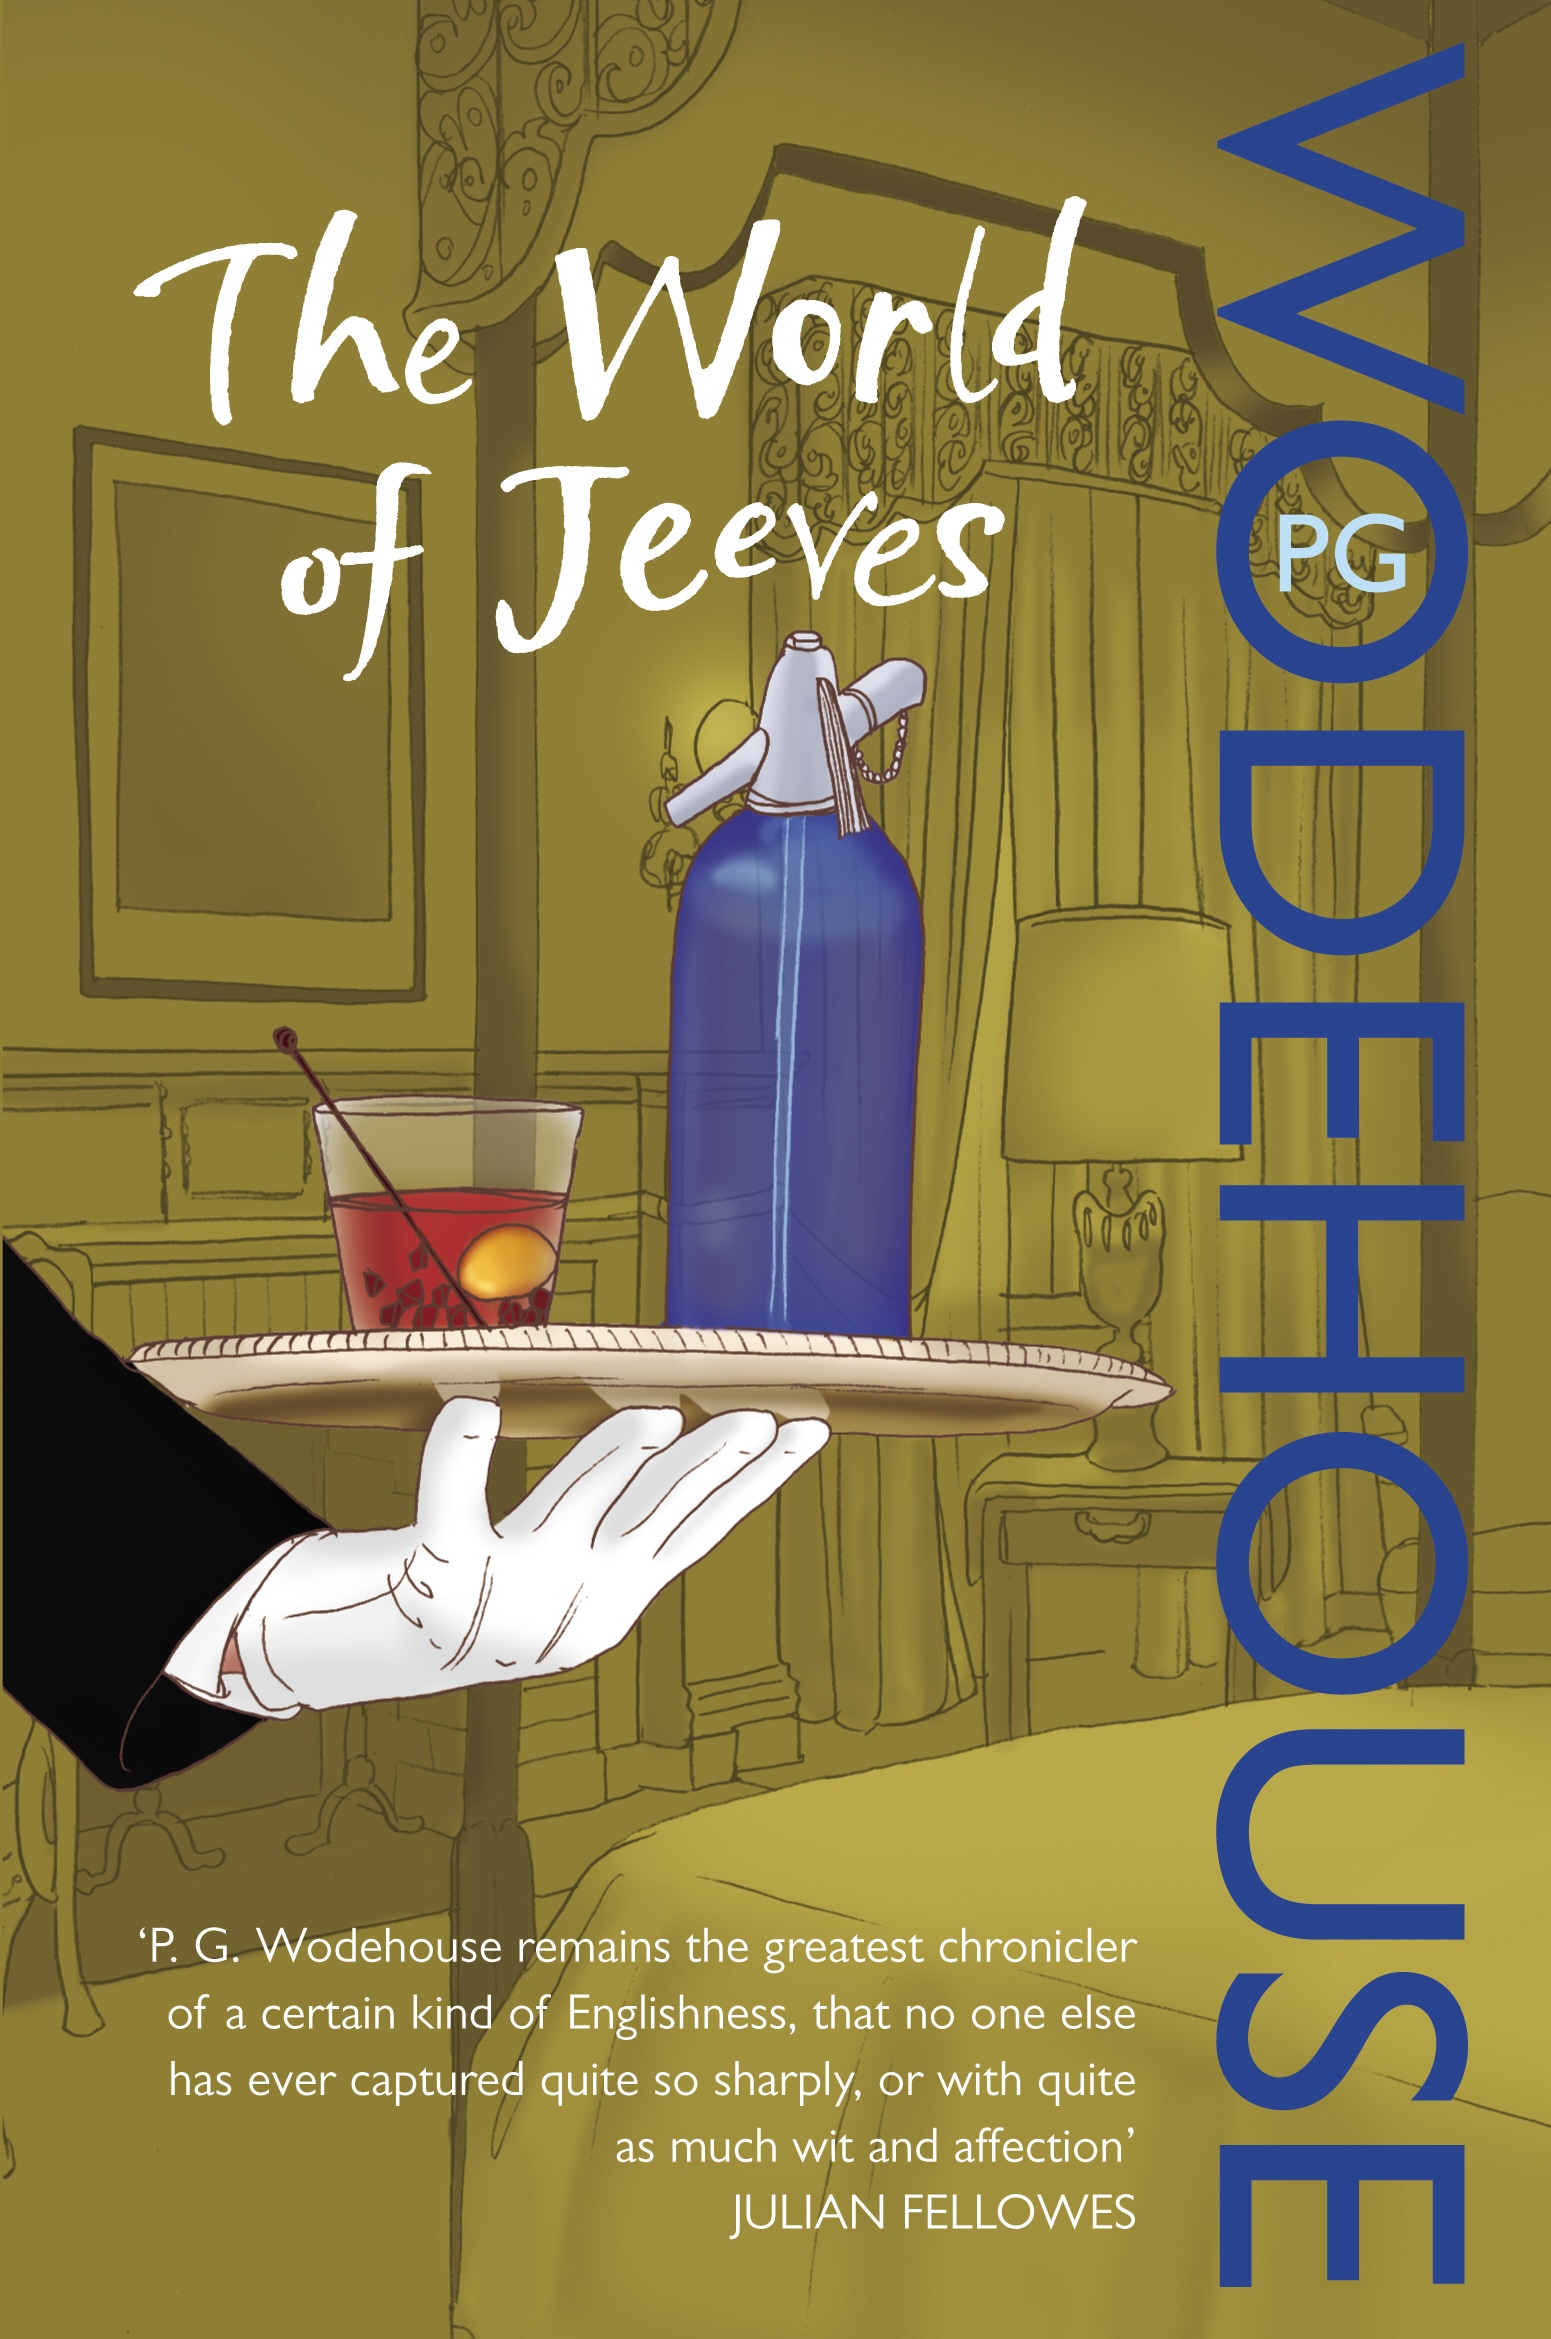 Book “The World of Jeeves” by P.G. Wodehouse — October 2, 2008